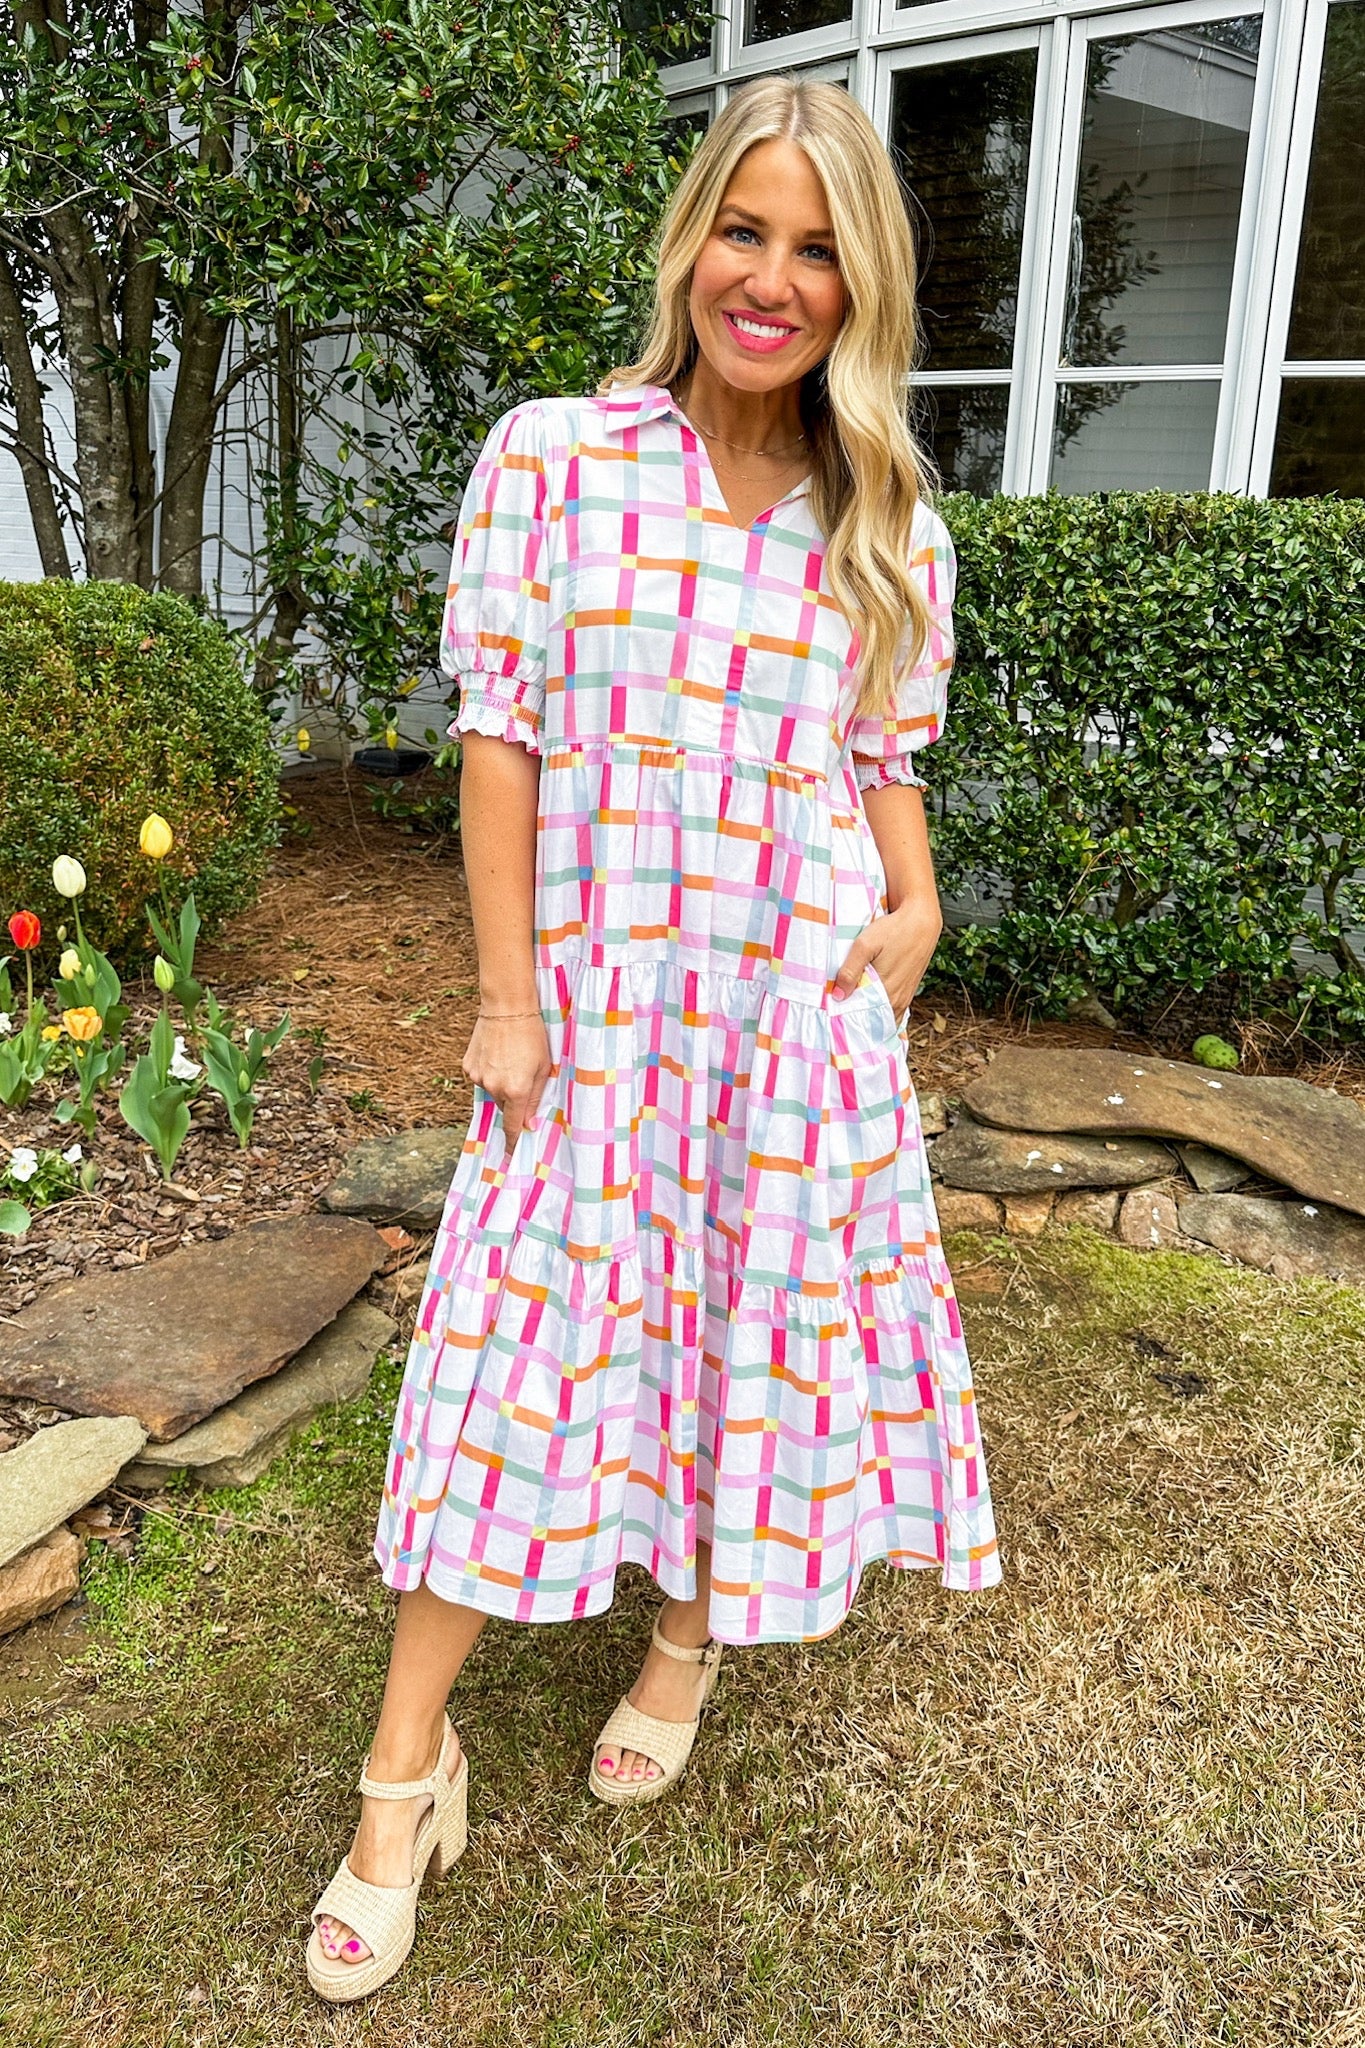 The Molly Look Me Up Multi Color Tiered Midi Dress by Michelle McDowell